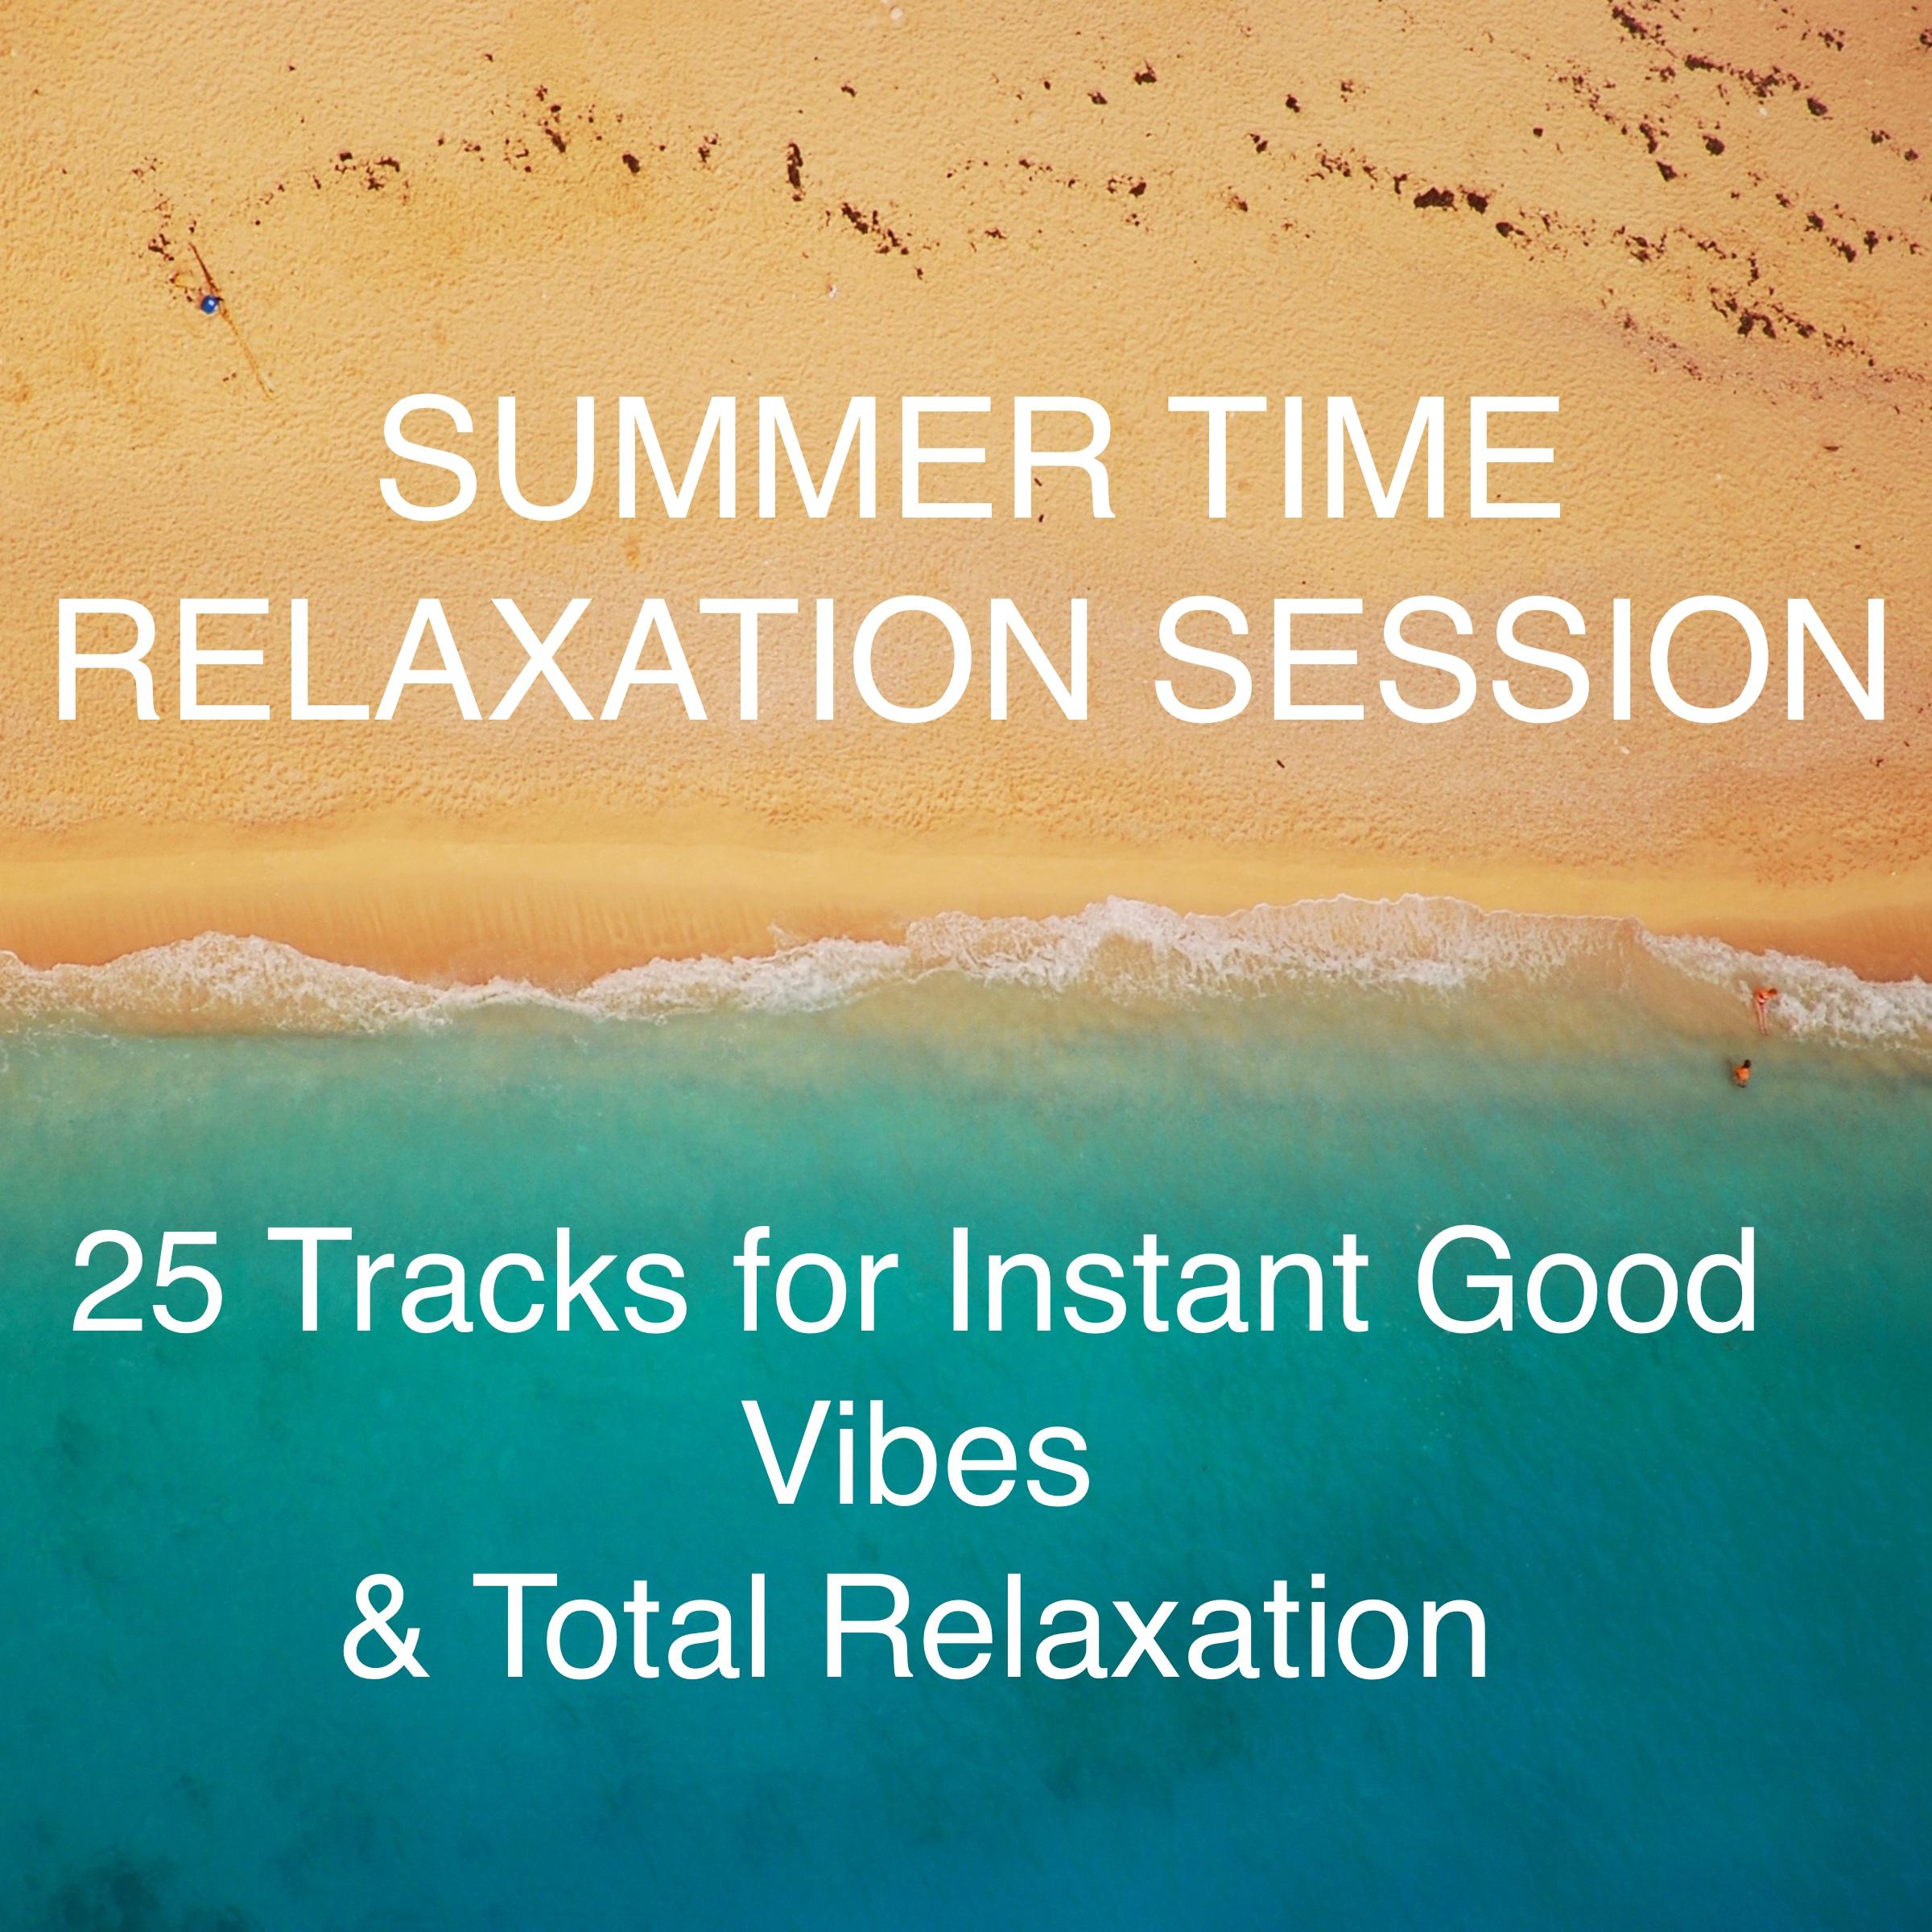 Summertime Relaxation Sessions - 25 Tracks for Instant Good Vibes & Total Relaxation